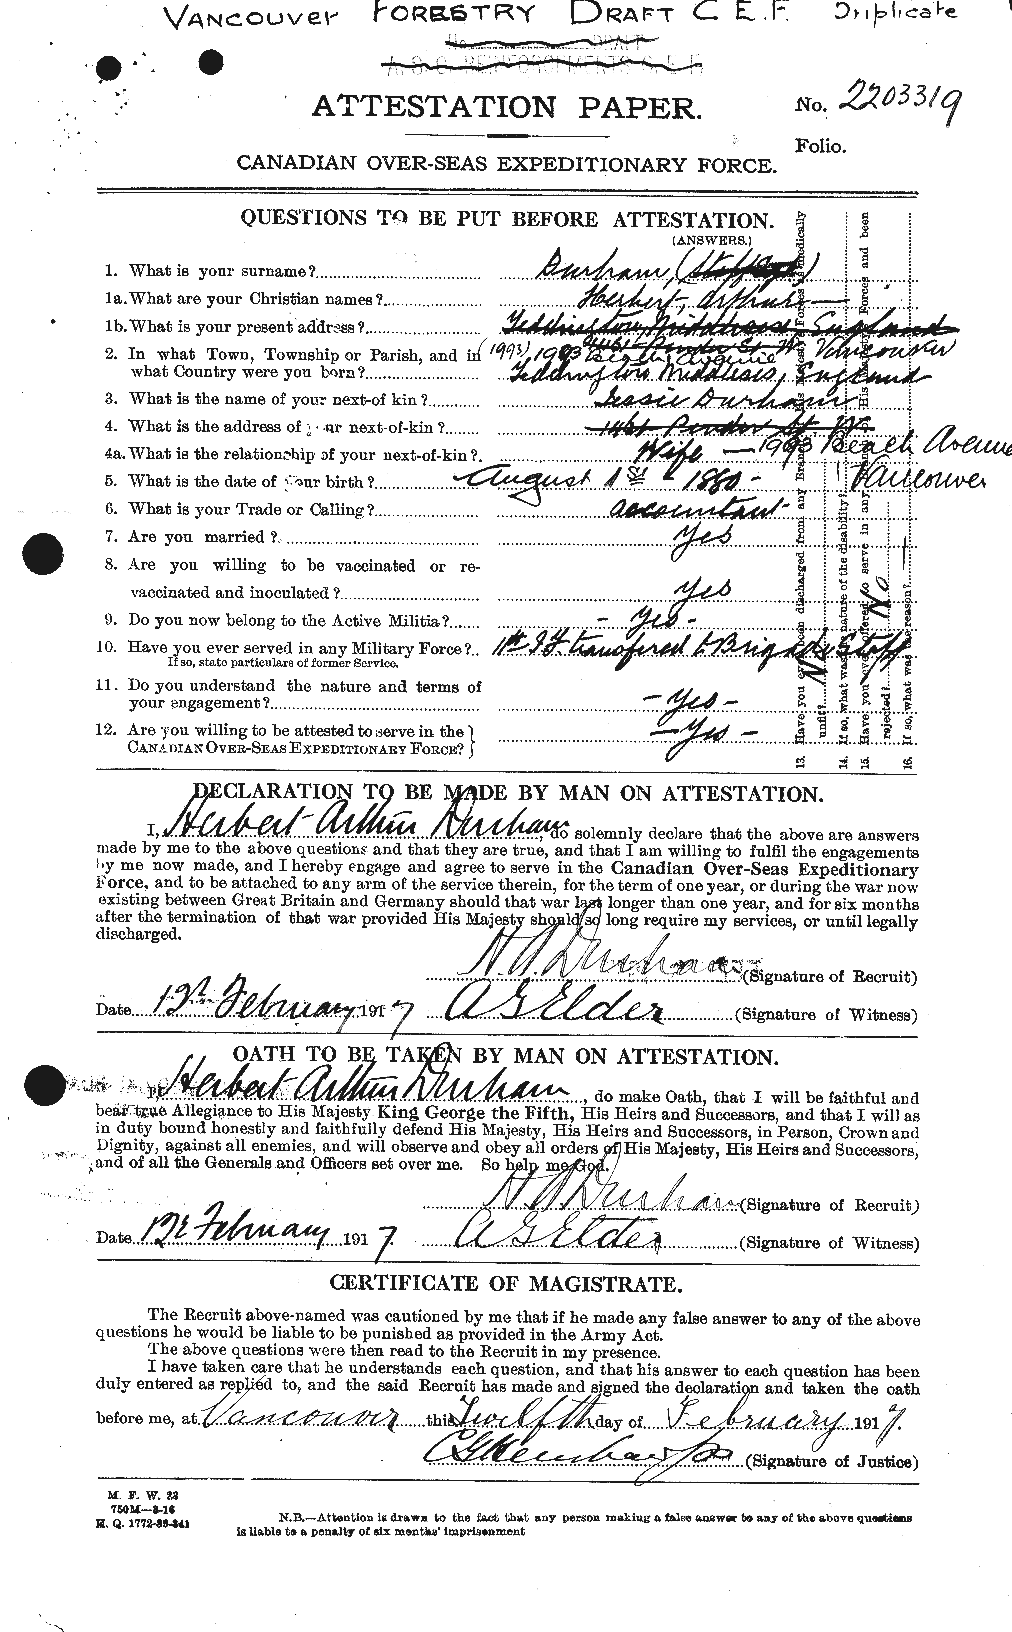 Personnel Records of the First World War - CEF 303629a